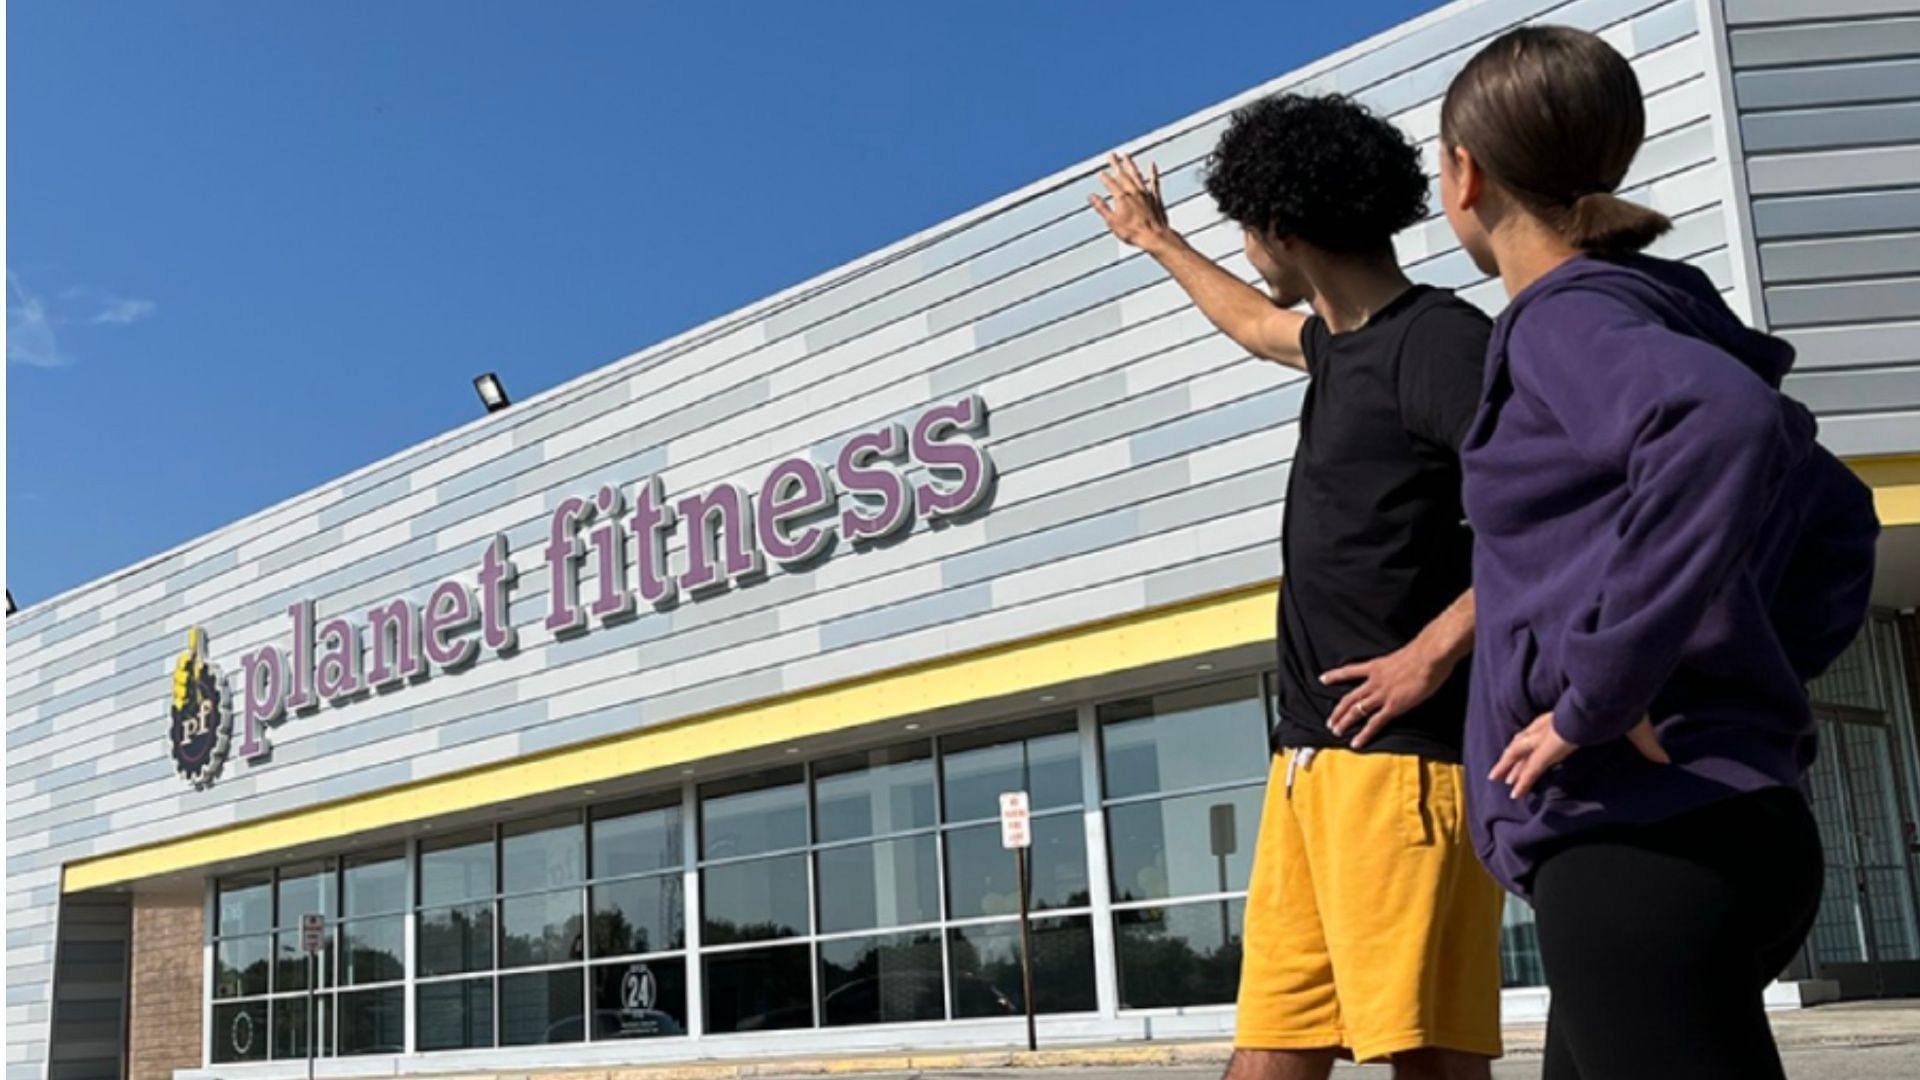 An image of Planet Fitness center. (Image via Facebook/ Planet Fitness)